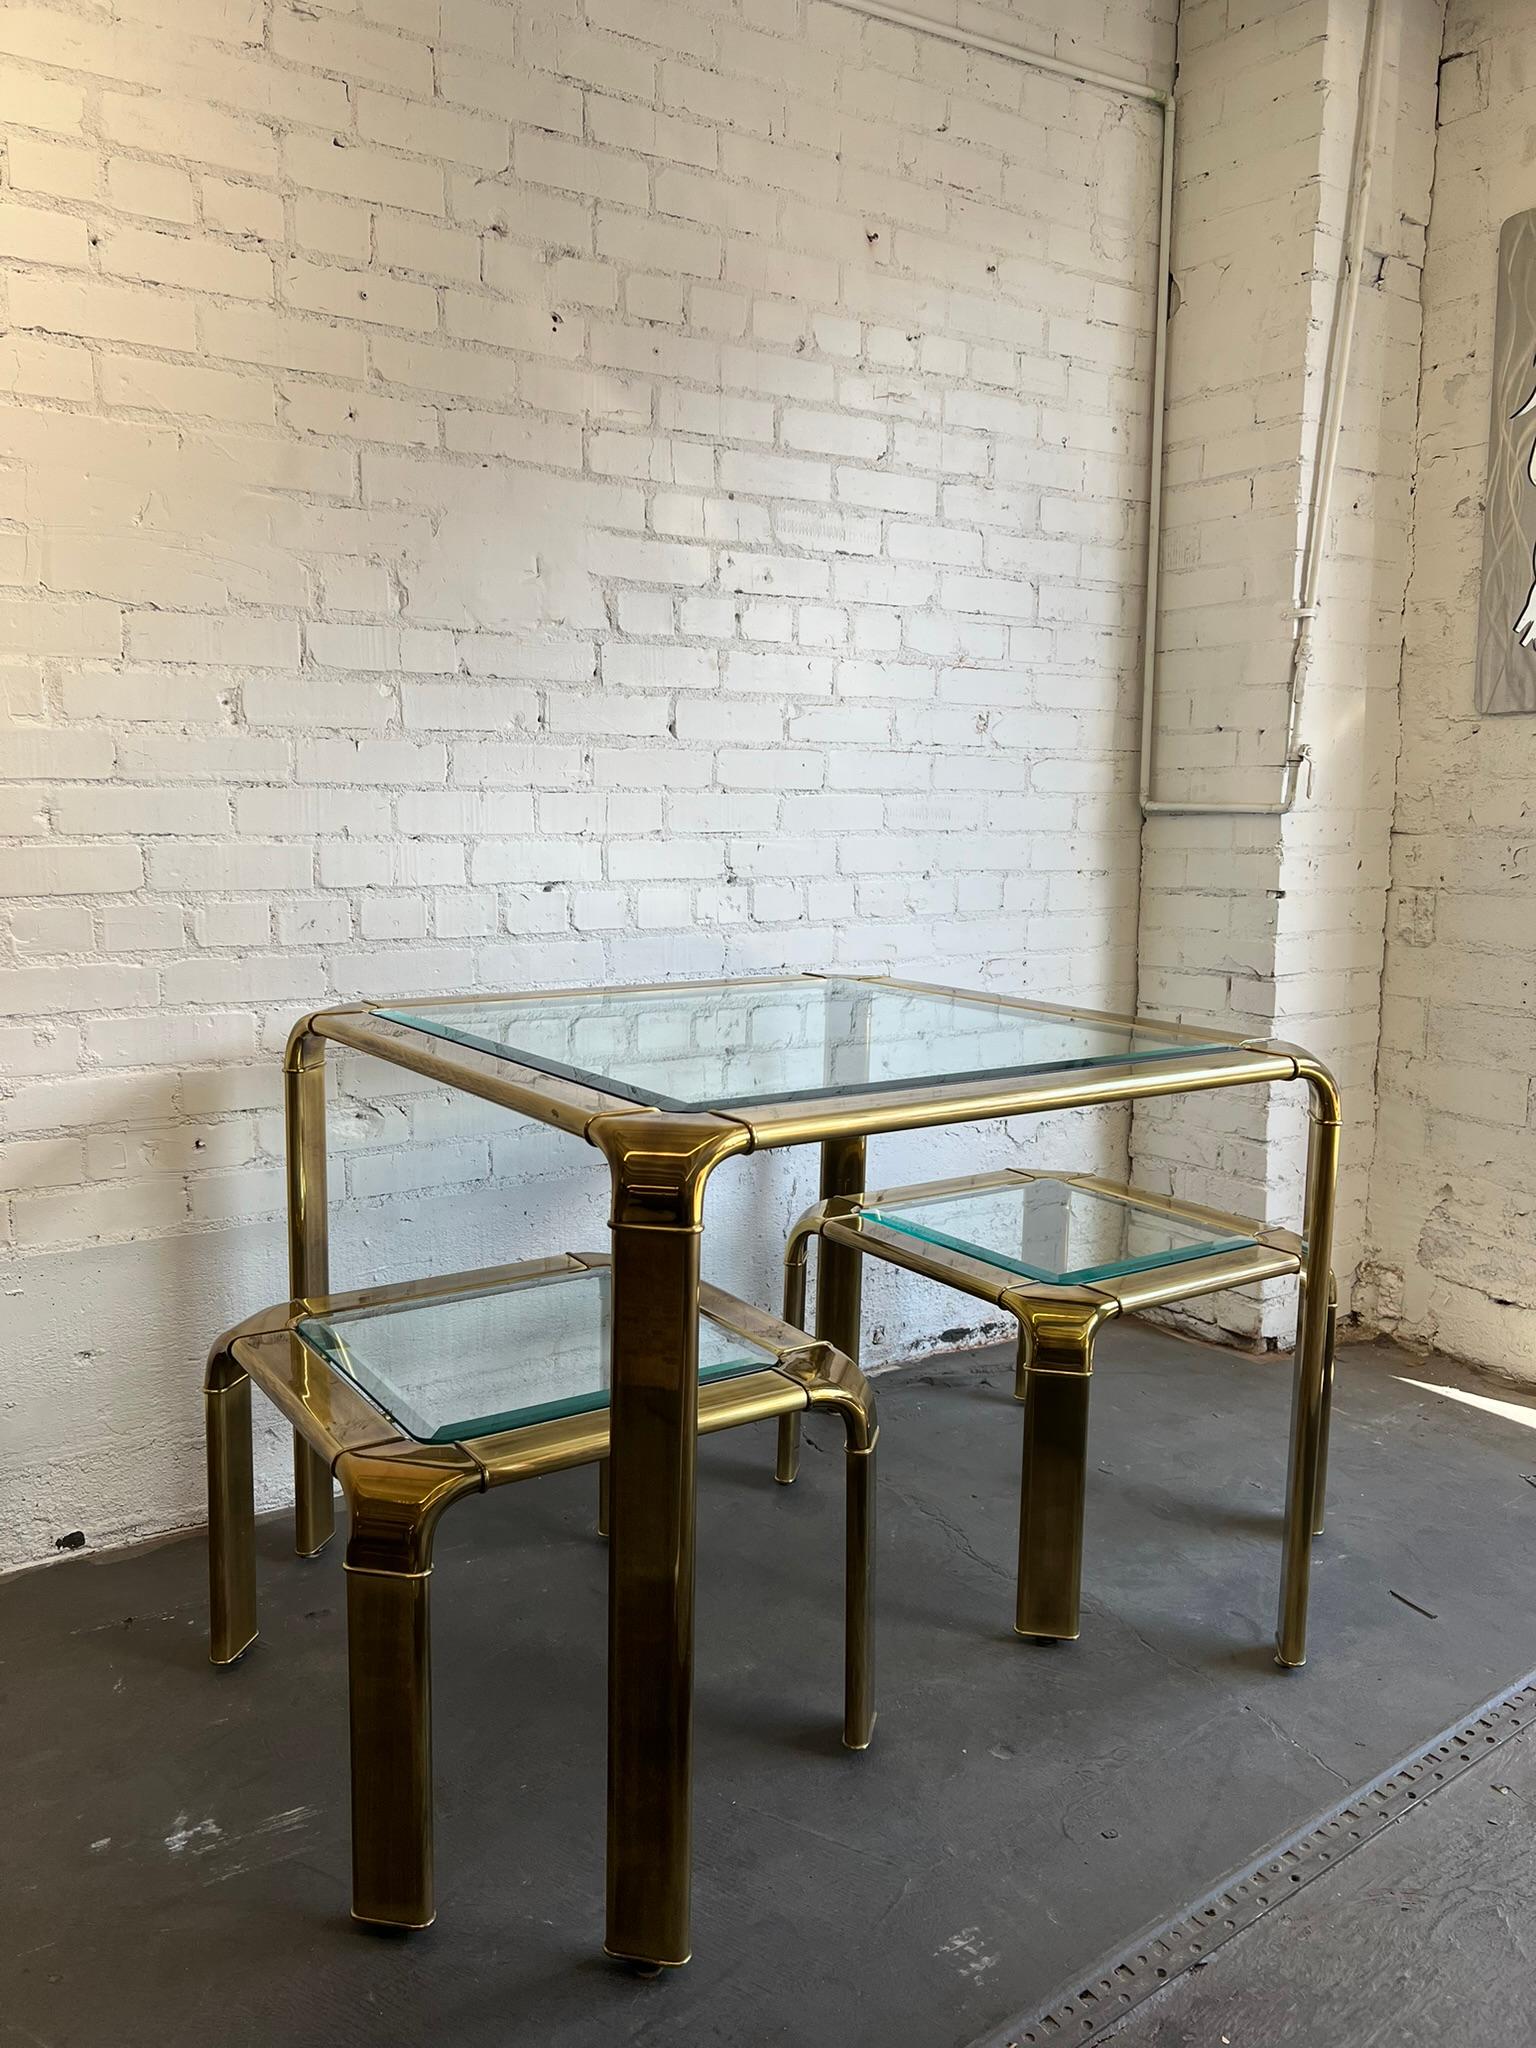 Beautifully designed 1980’s John Widdicomb brass waterfall side tables. Complete with an antiqued brass bodies and thick beveled glass tops.

Coffee tables, and consoles by Widdicomb in this style are available in the marketplace. However, a